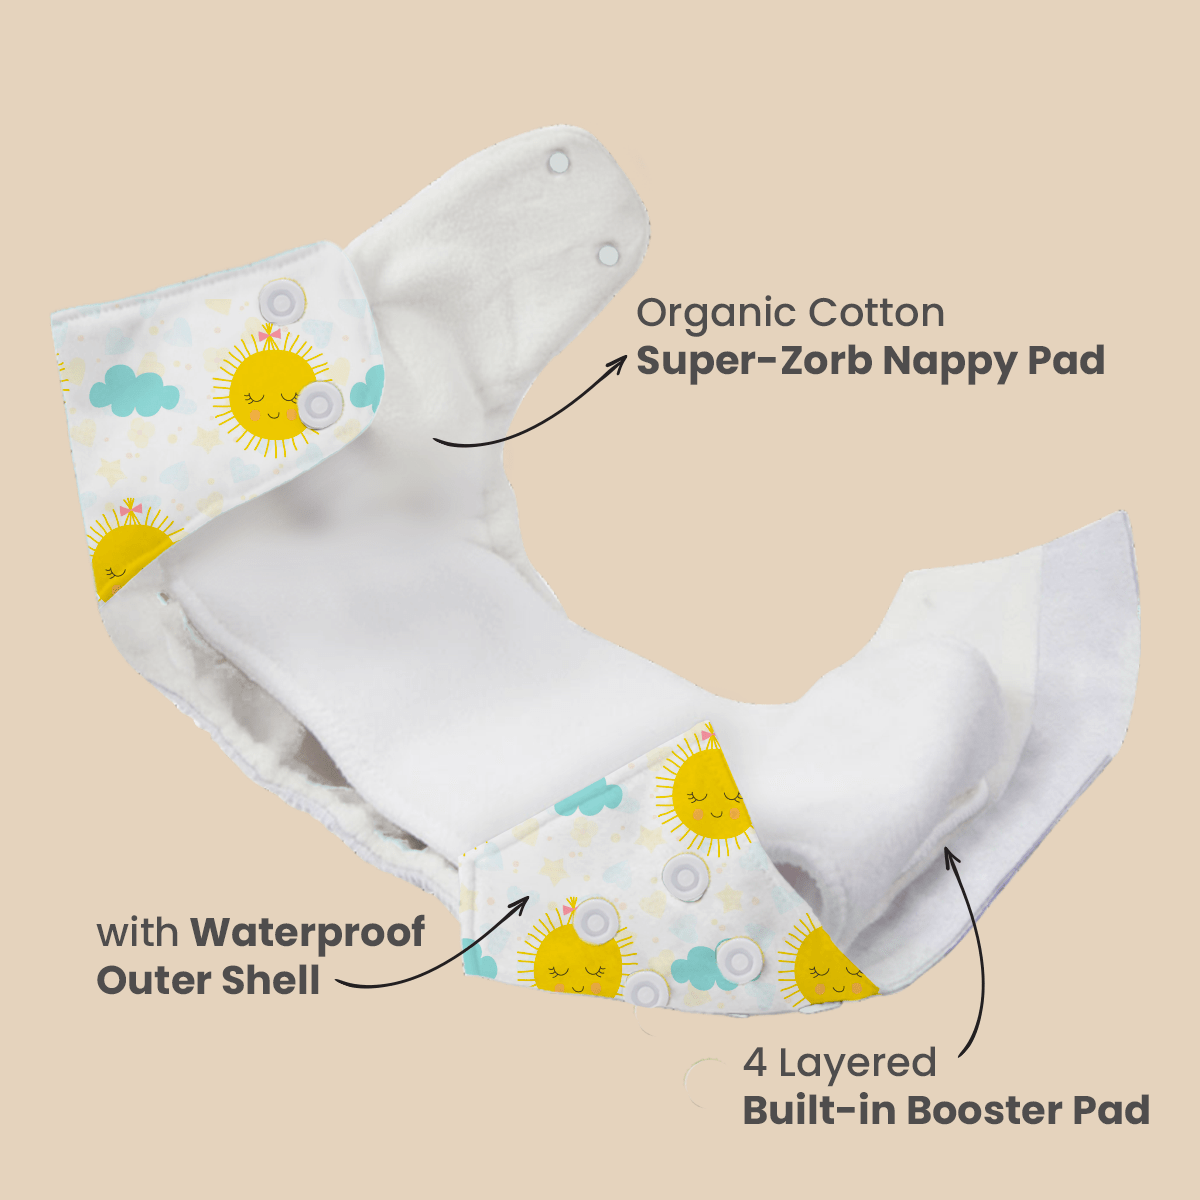 Plant Powered Premium Cloth Diaper for Babies - Pack of 5-Assortment